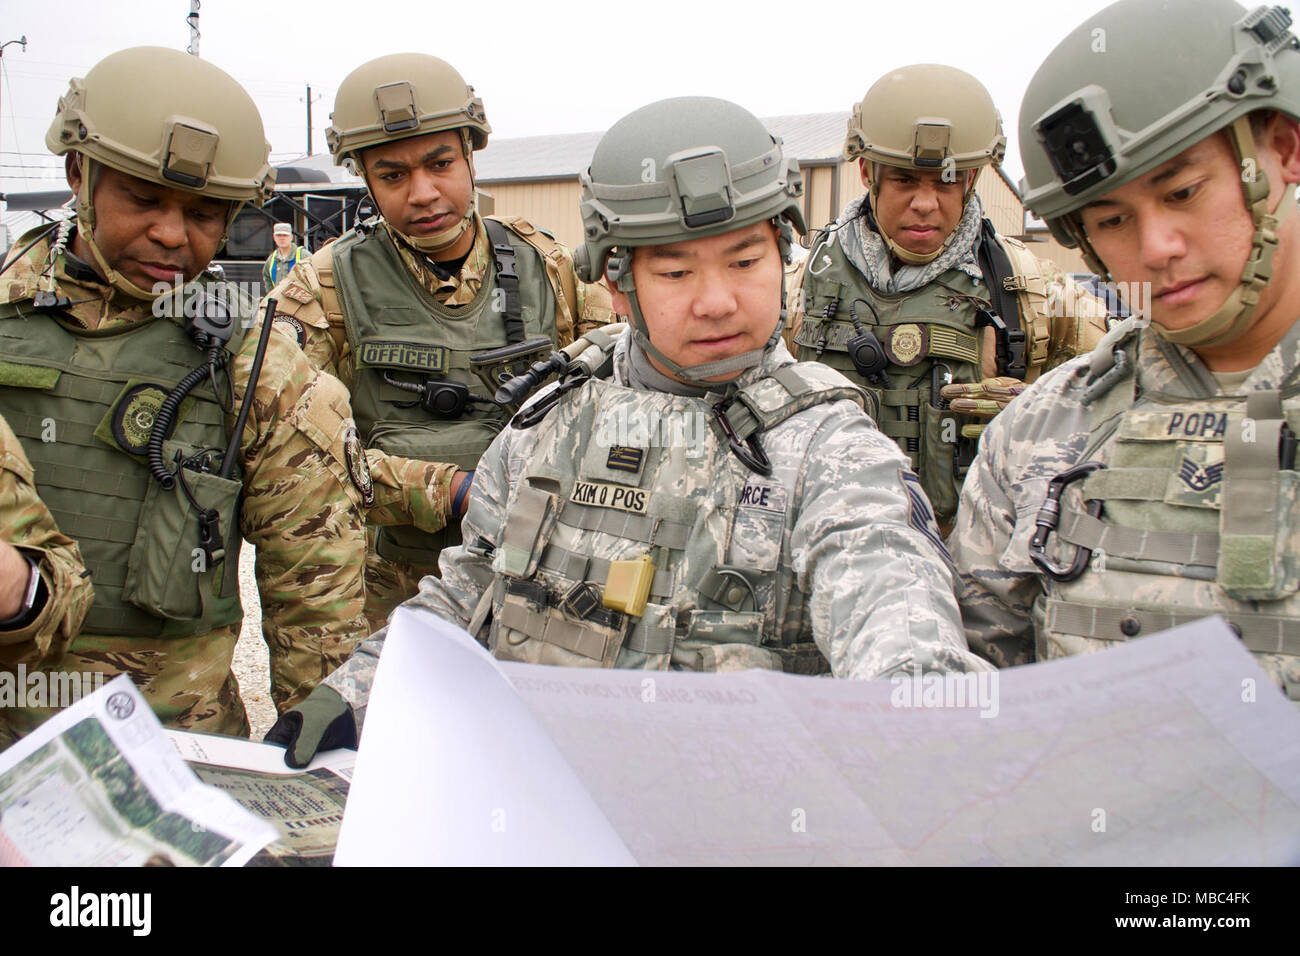 Master Sgt. Robert Kim, Vice Troop Commander for Patriot South exercise, looks over a map of their training grounds with the Mississippi Department of Wildlife, Fisheries and Parks Special Response Team to plan their next steps for the exercise, Feb. 13, 2018, at Camp Shelby, Mississippi. Patriot South focuses on increasing the understanding of coordination, policies, and procedures required in conducting a Joint-Inter-Agency Domestic response. (U.S. Air National Guard Stock Photo